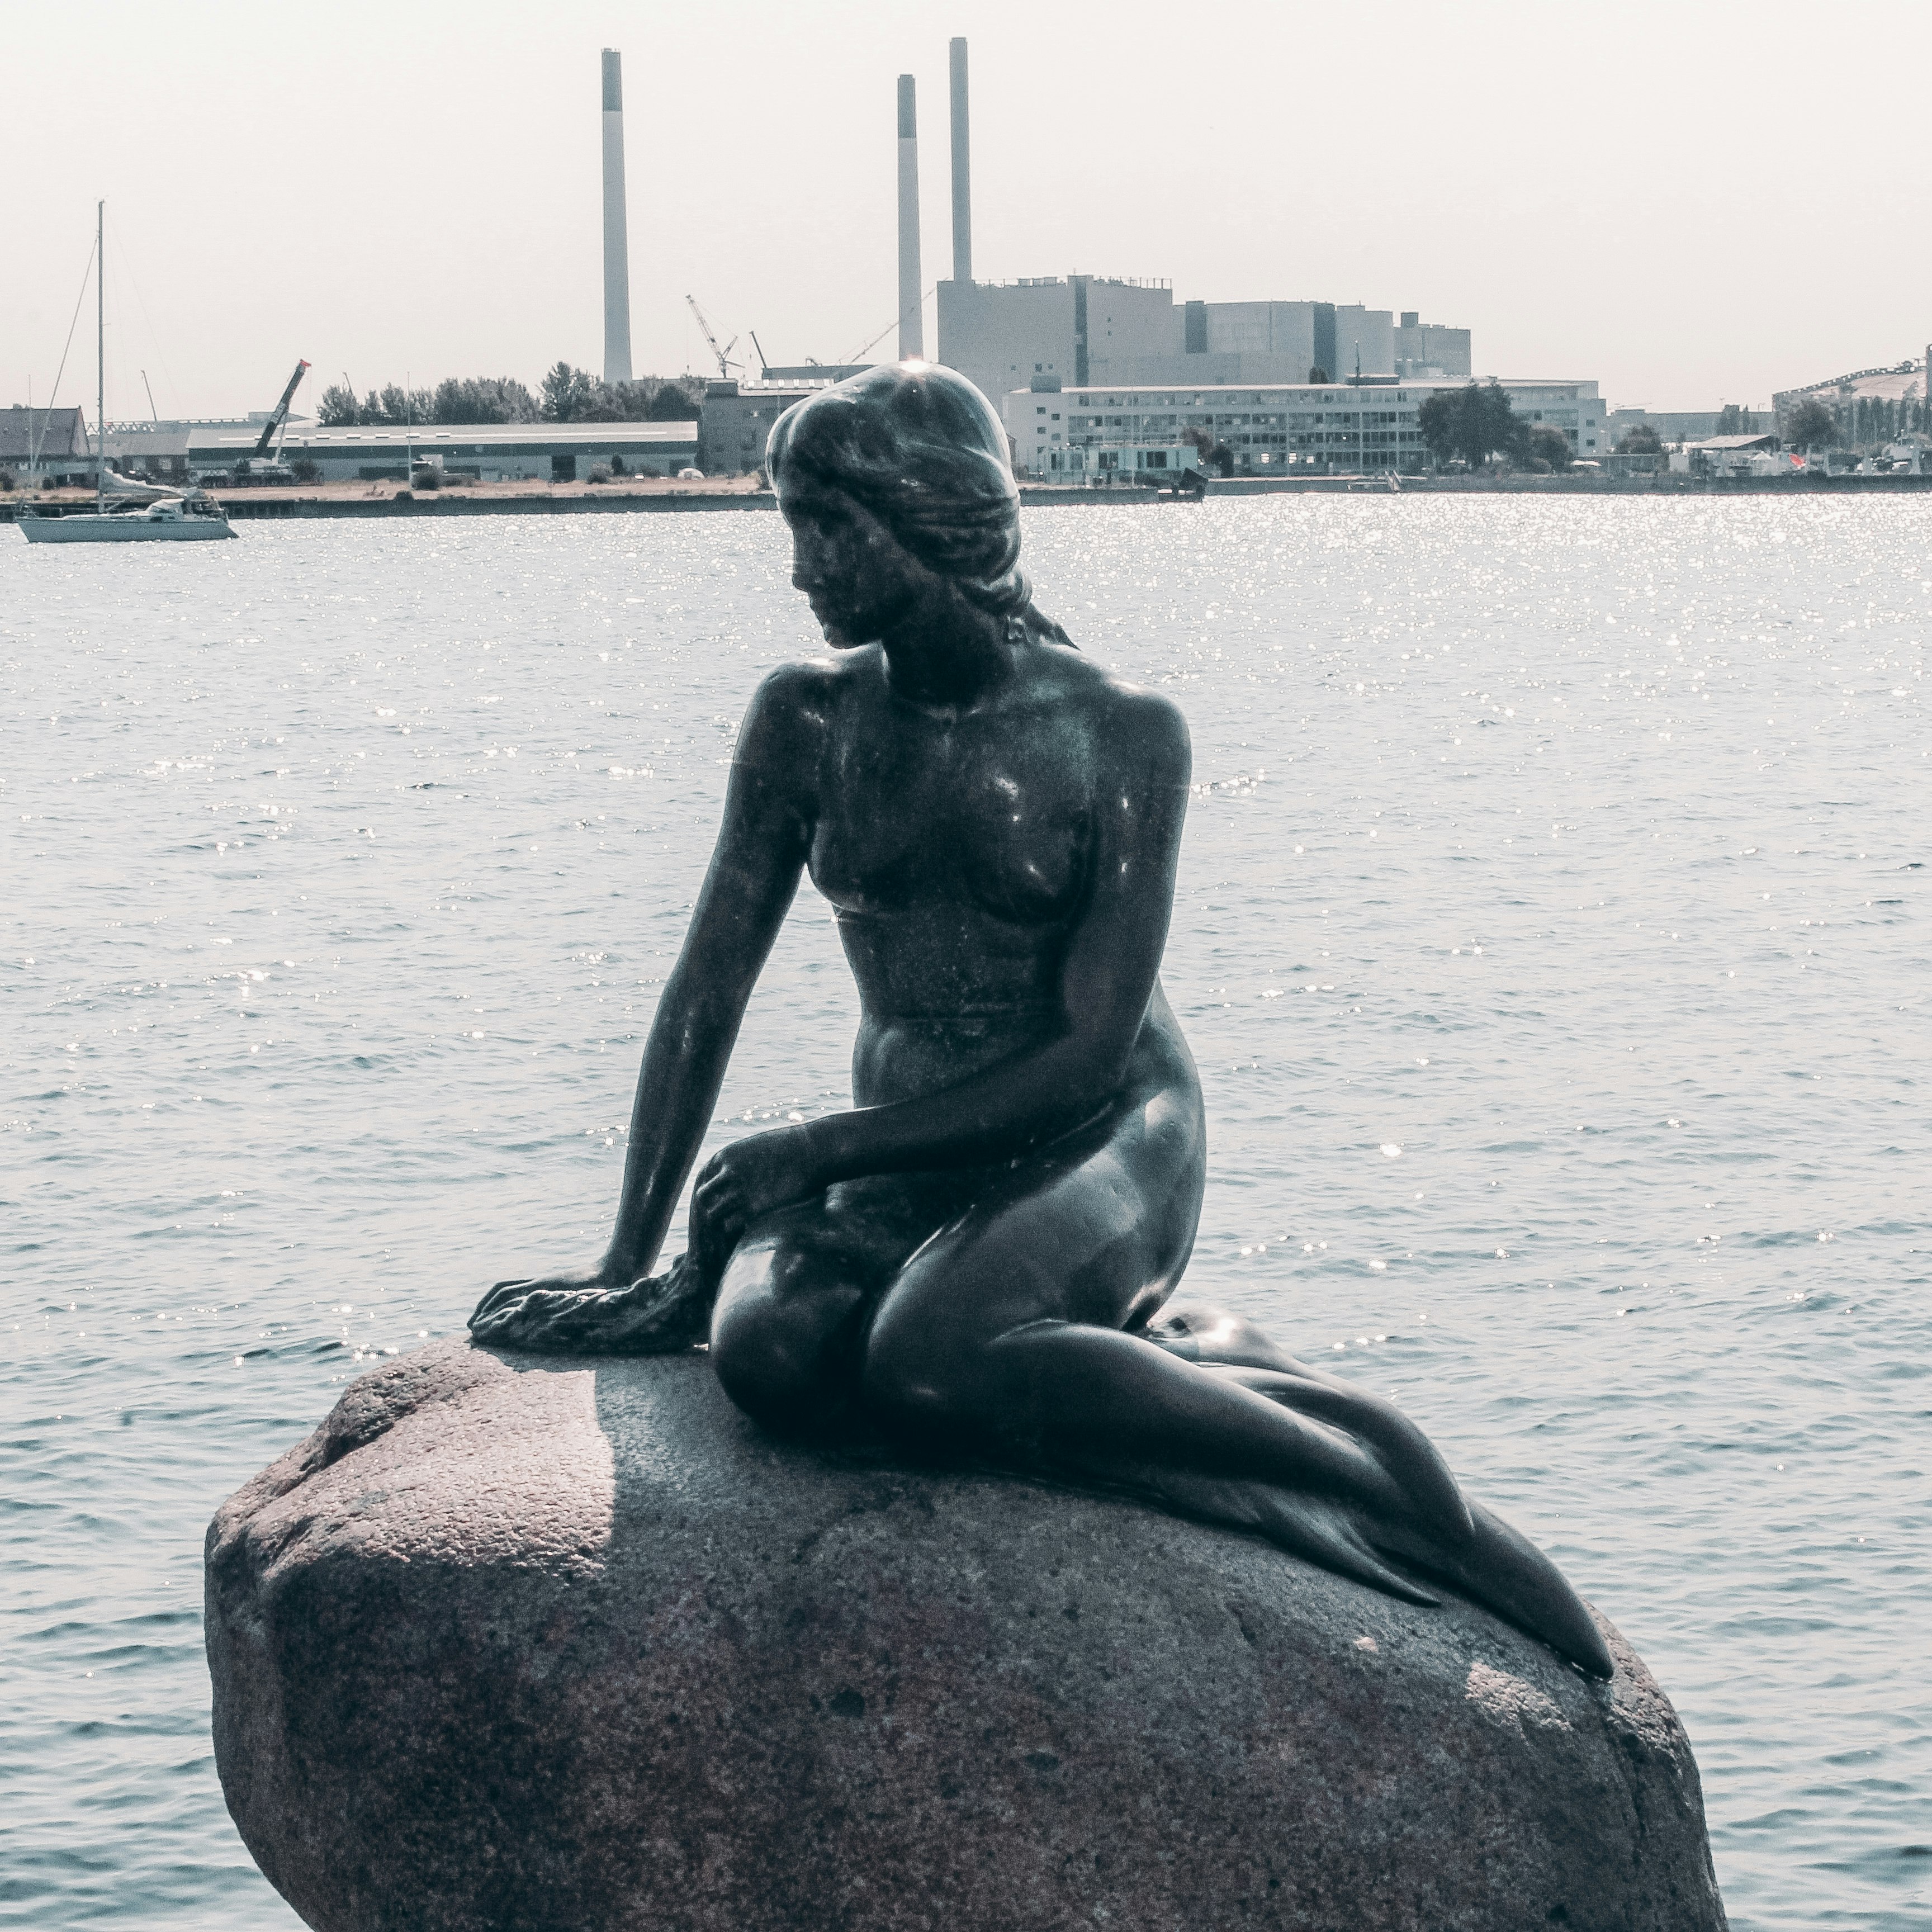 statue of woman sitting on rock near body of water during daytime